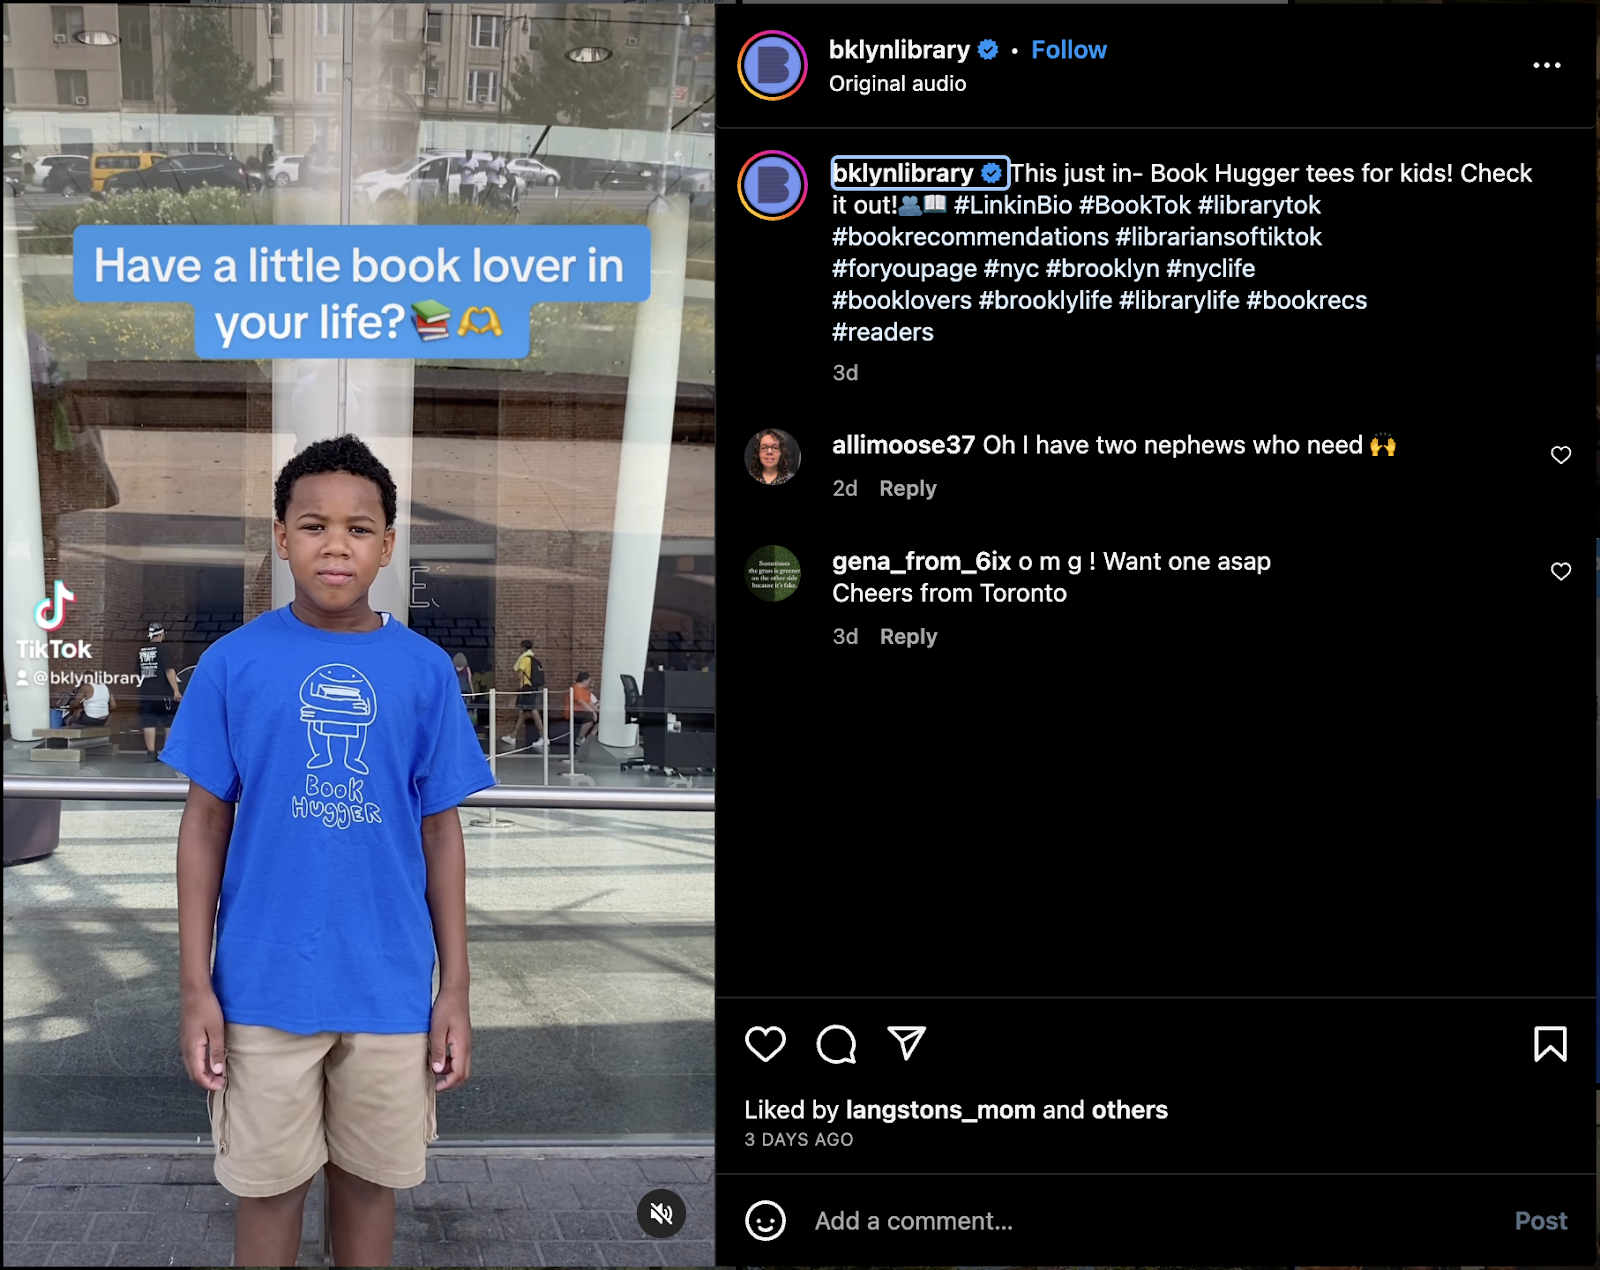 Brooklyn Public Library insta post featuring a kid wearing the Book Hugger tee